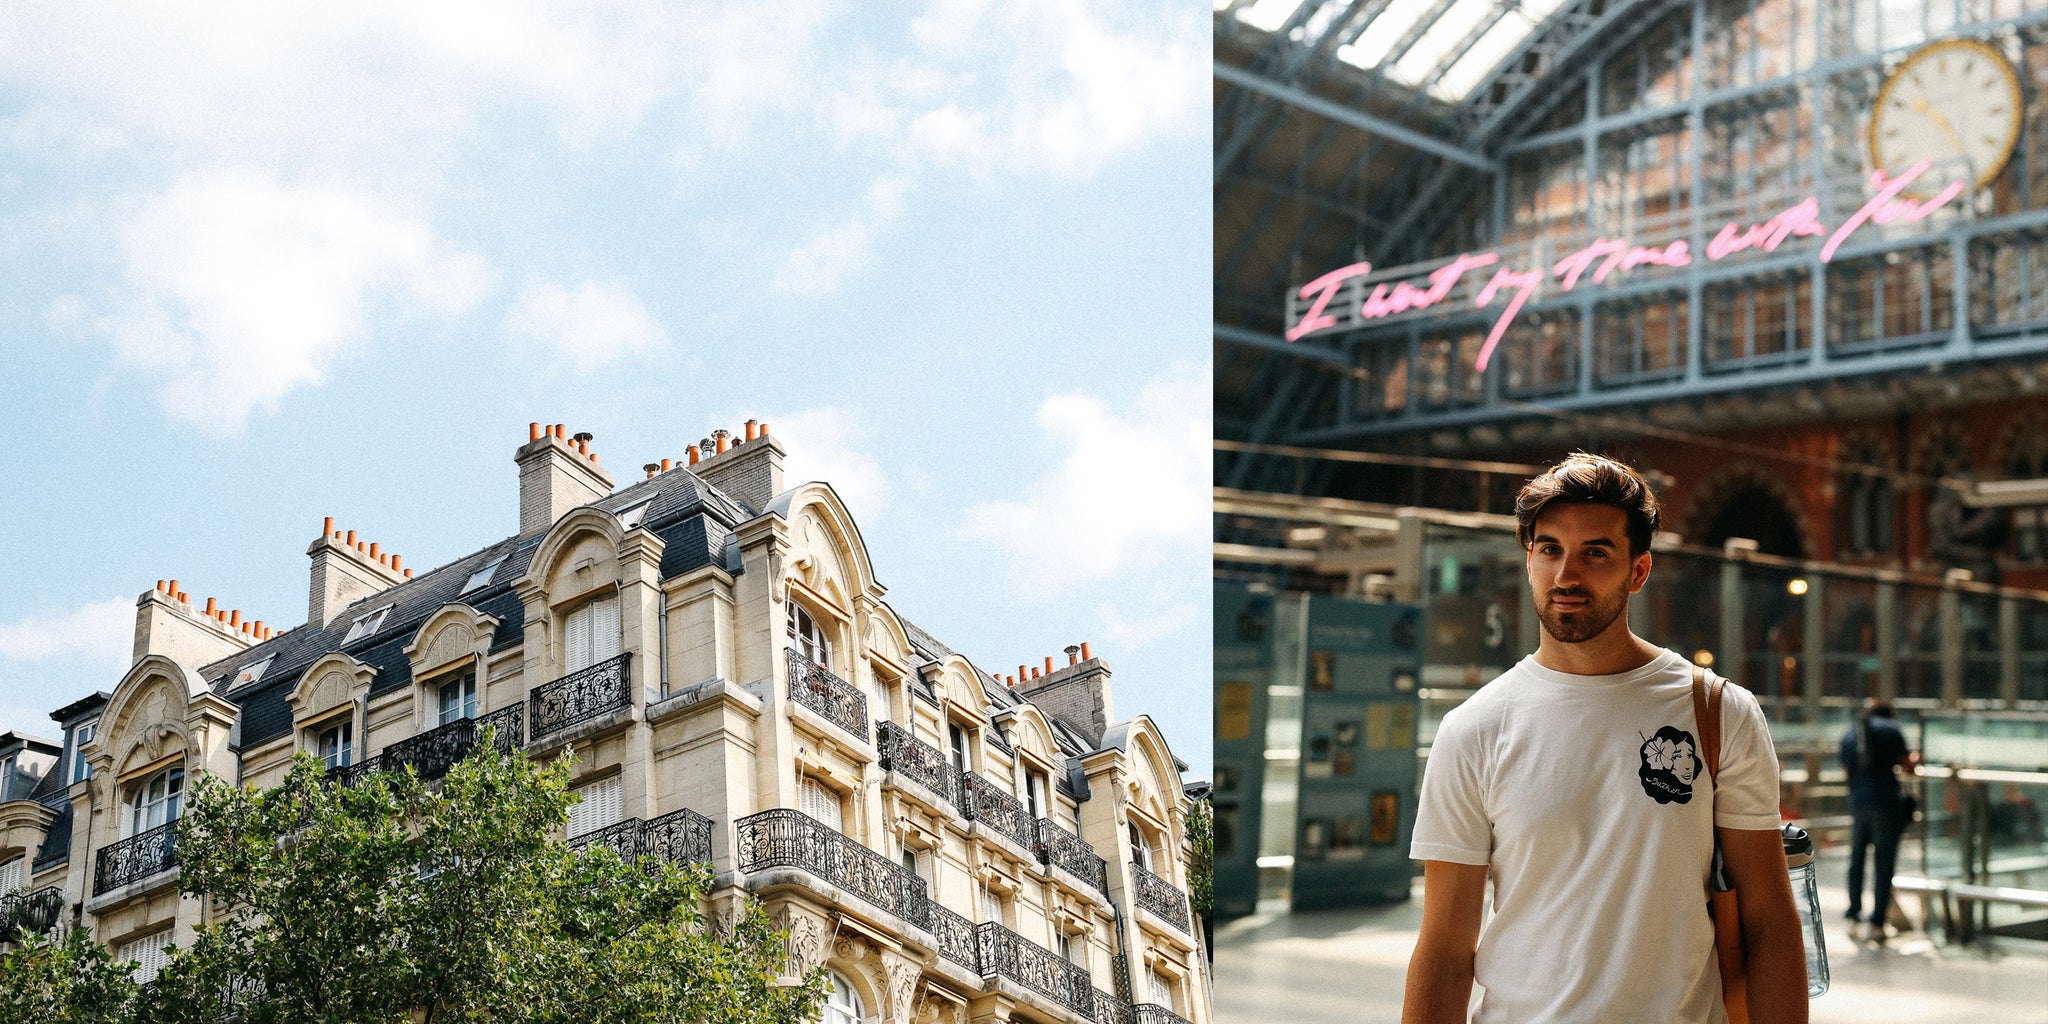 Bather's Excellent Adventures: Paris with Nicole Breanne and Lucas Young wearing Bather's White Hula Girl Shirt